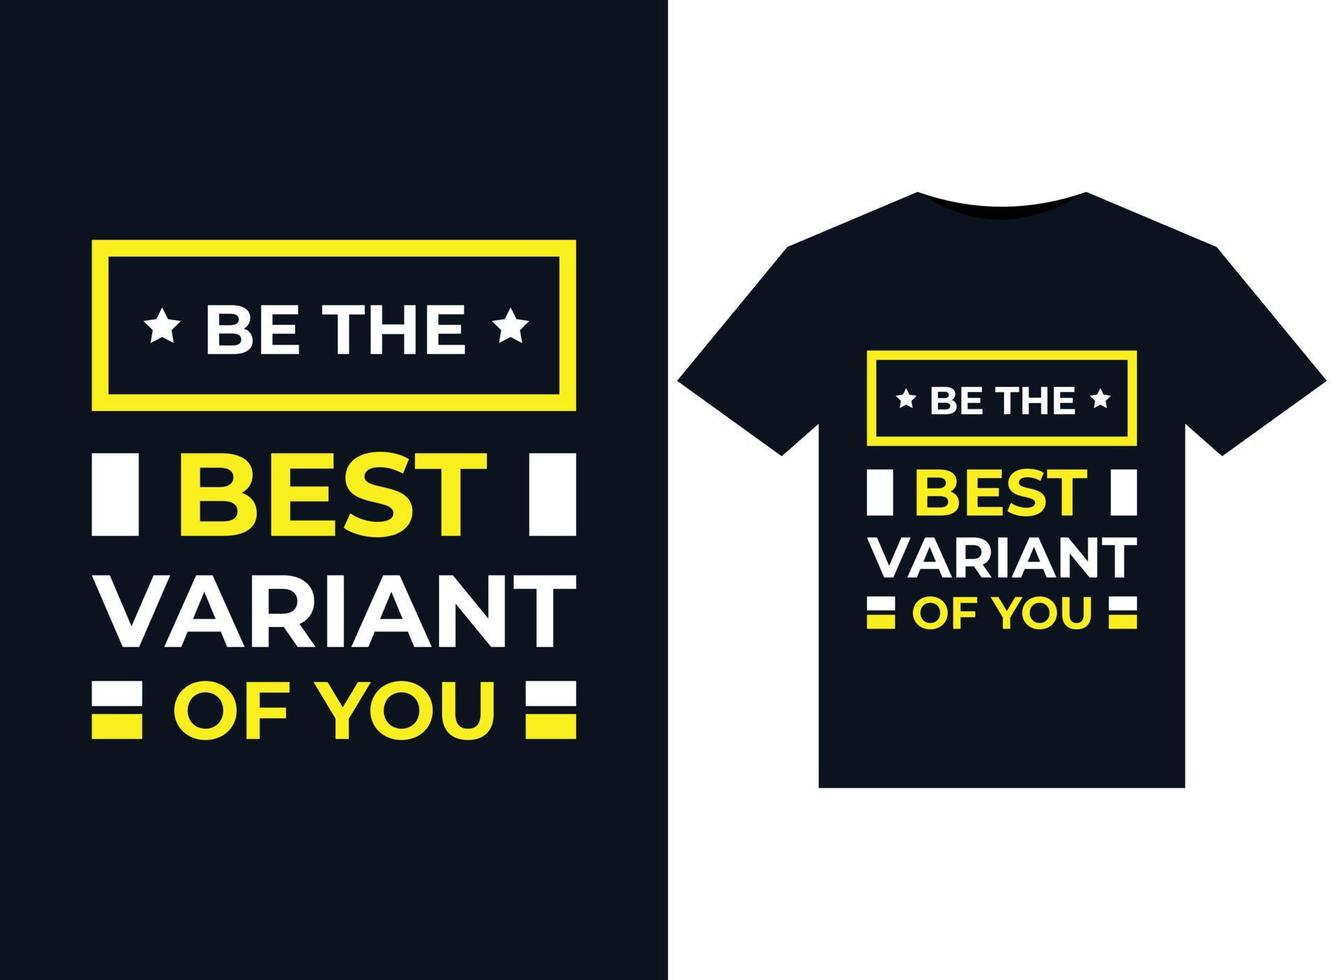 Be the best variant of you illustrations for print-ready T-Shirts design vector